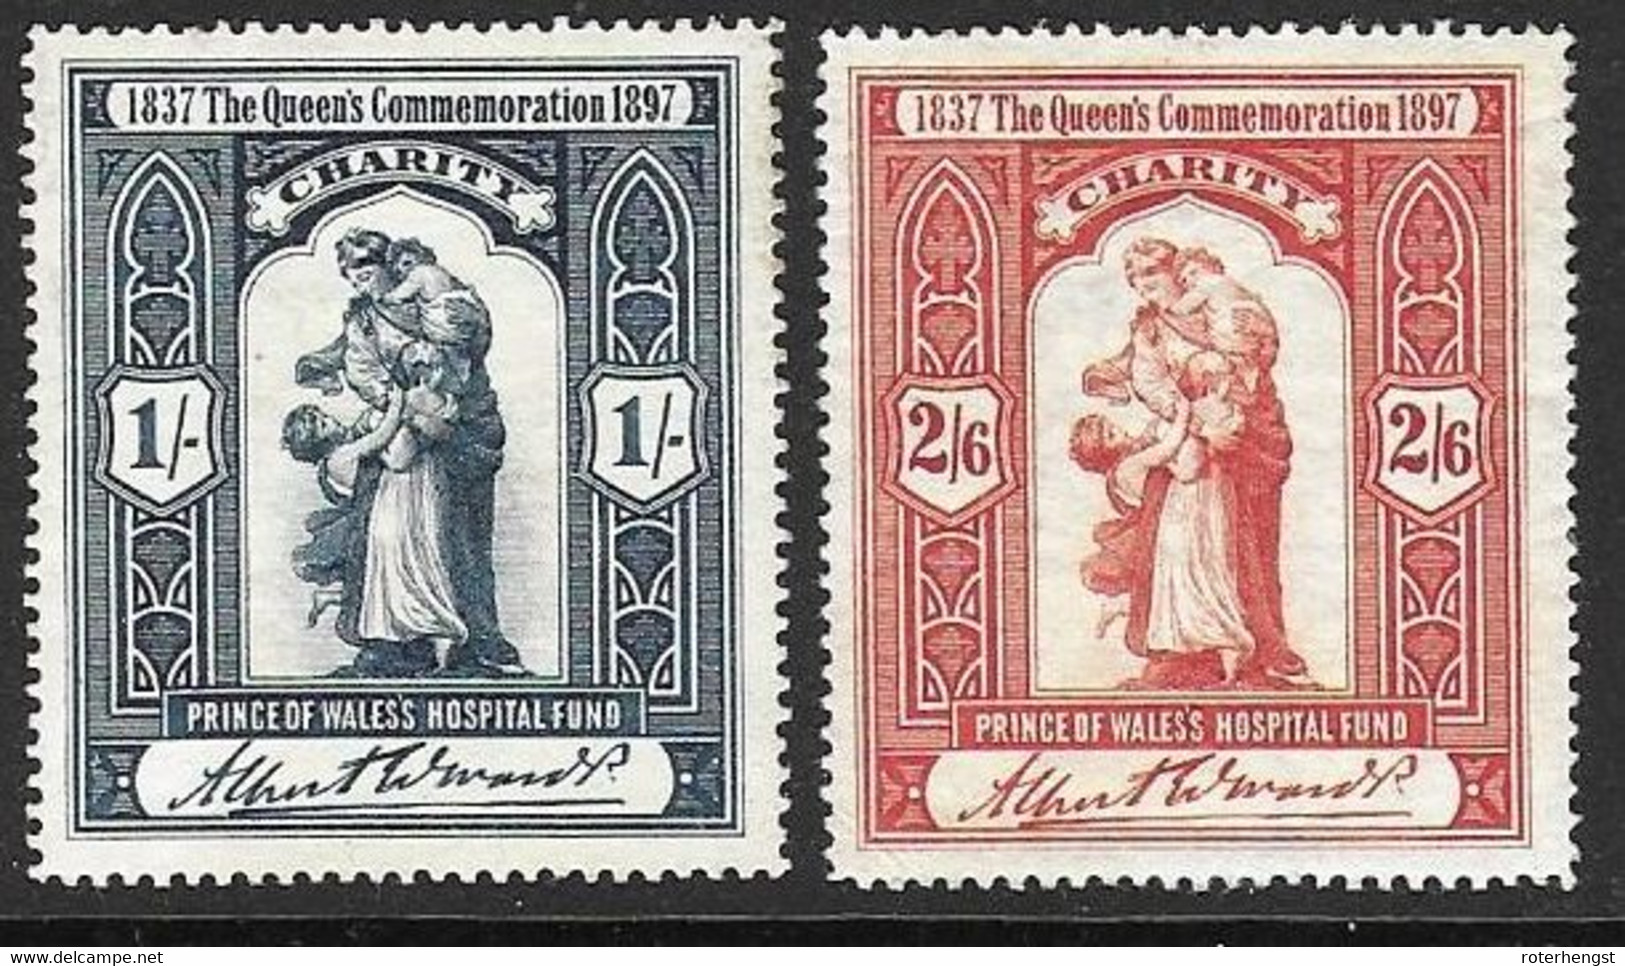 Queens Commemoration 1897 Mh * Charity Stamps - Unused Stamps